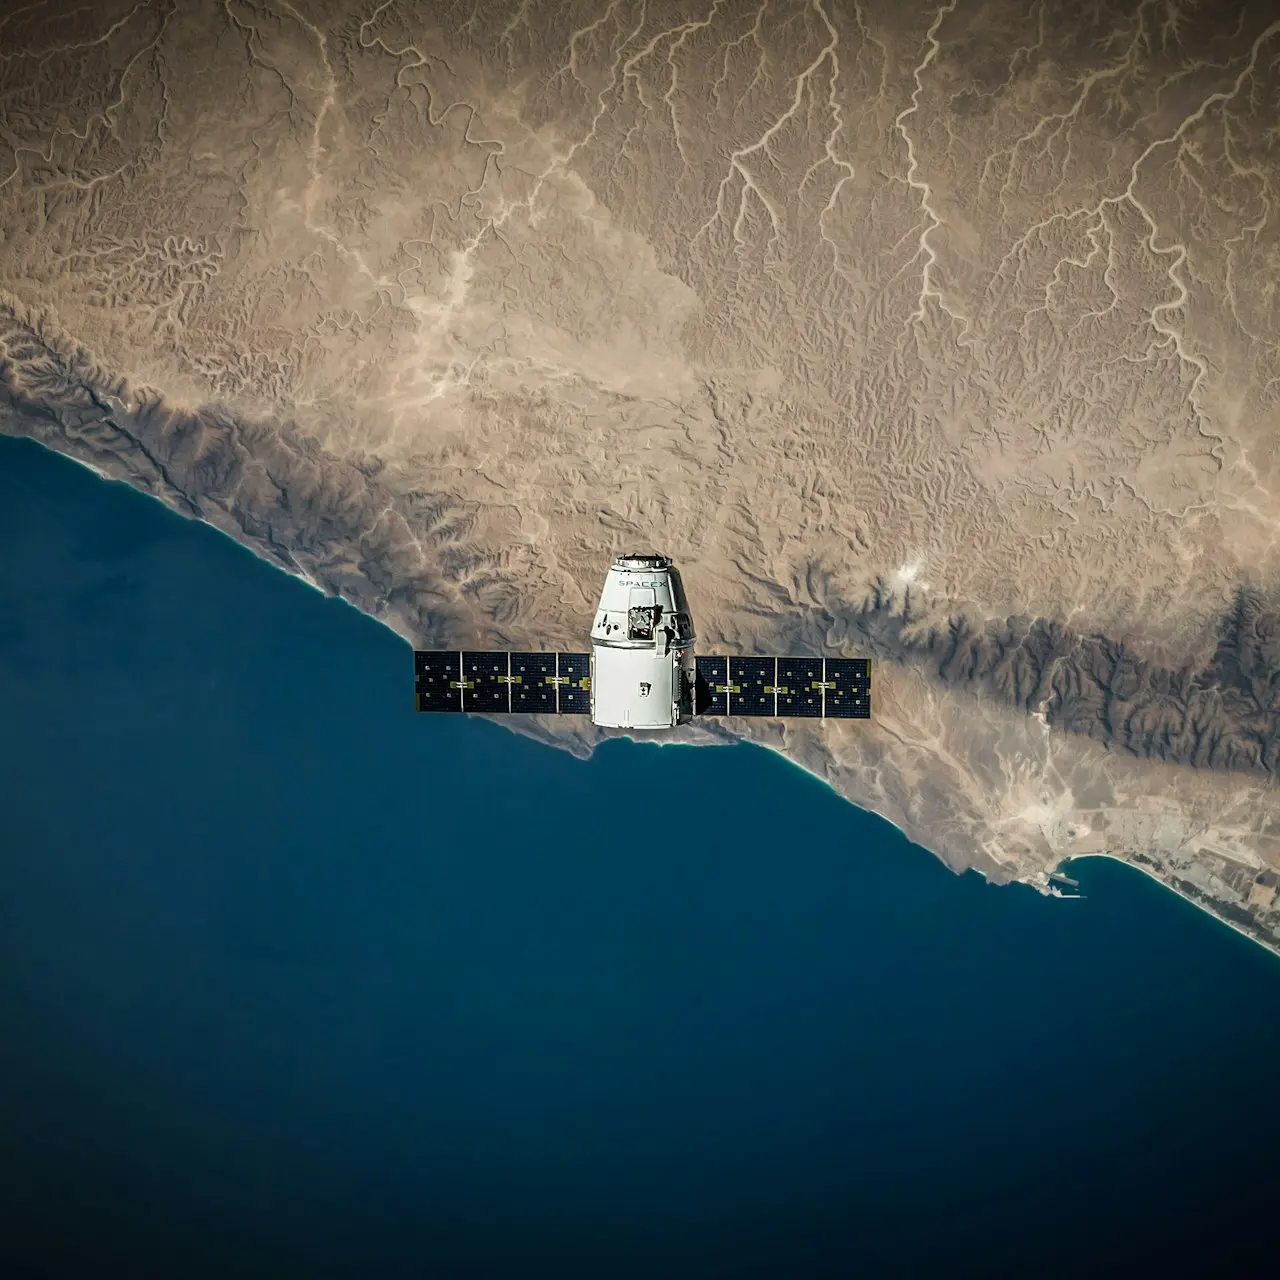 A space satellite hovering above the coastline